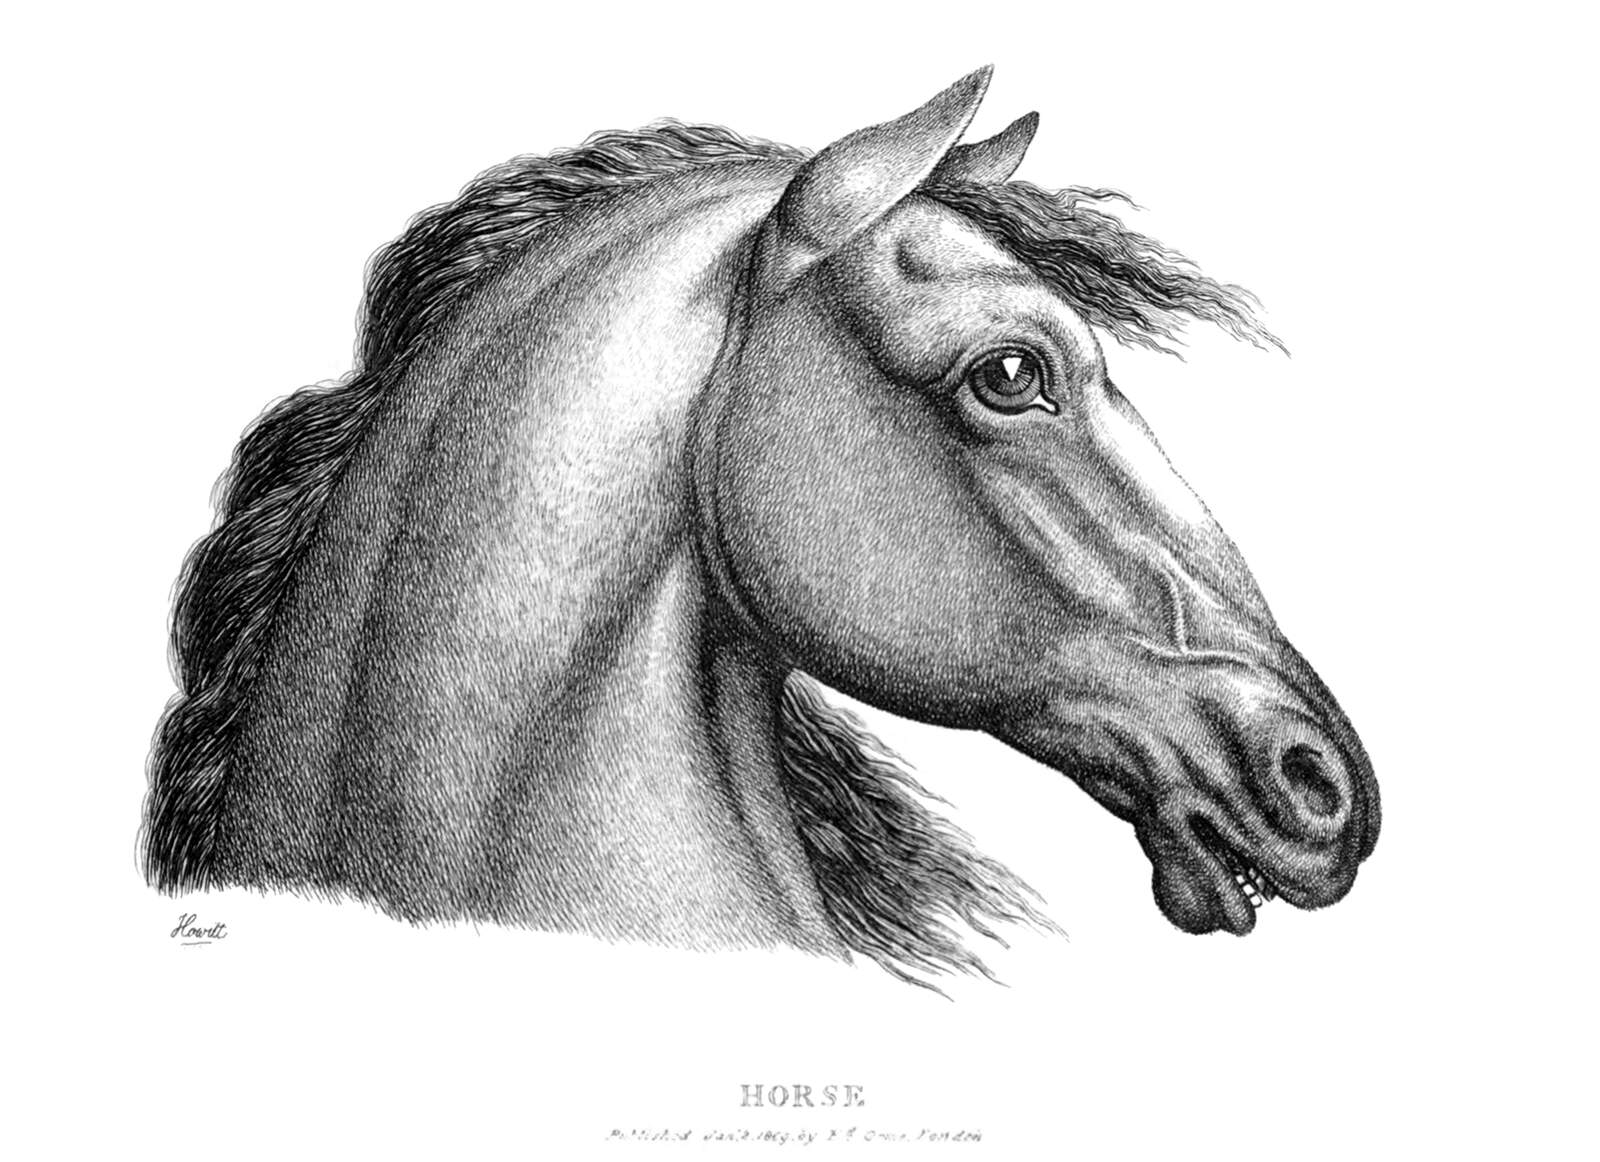 Horse’s Profile Old Book Illustrations